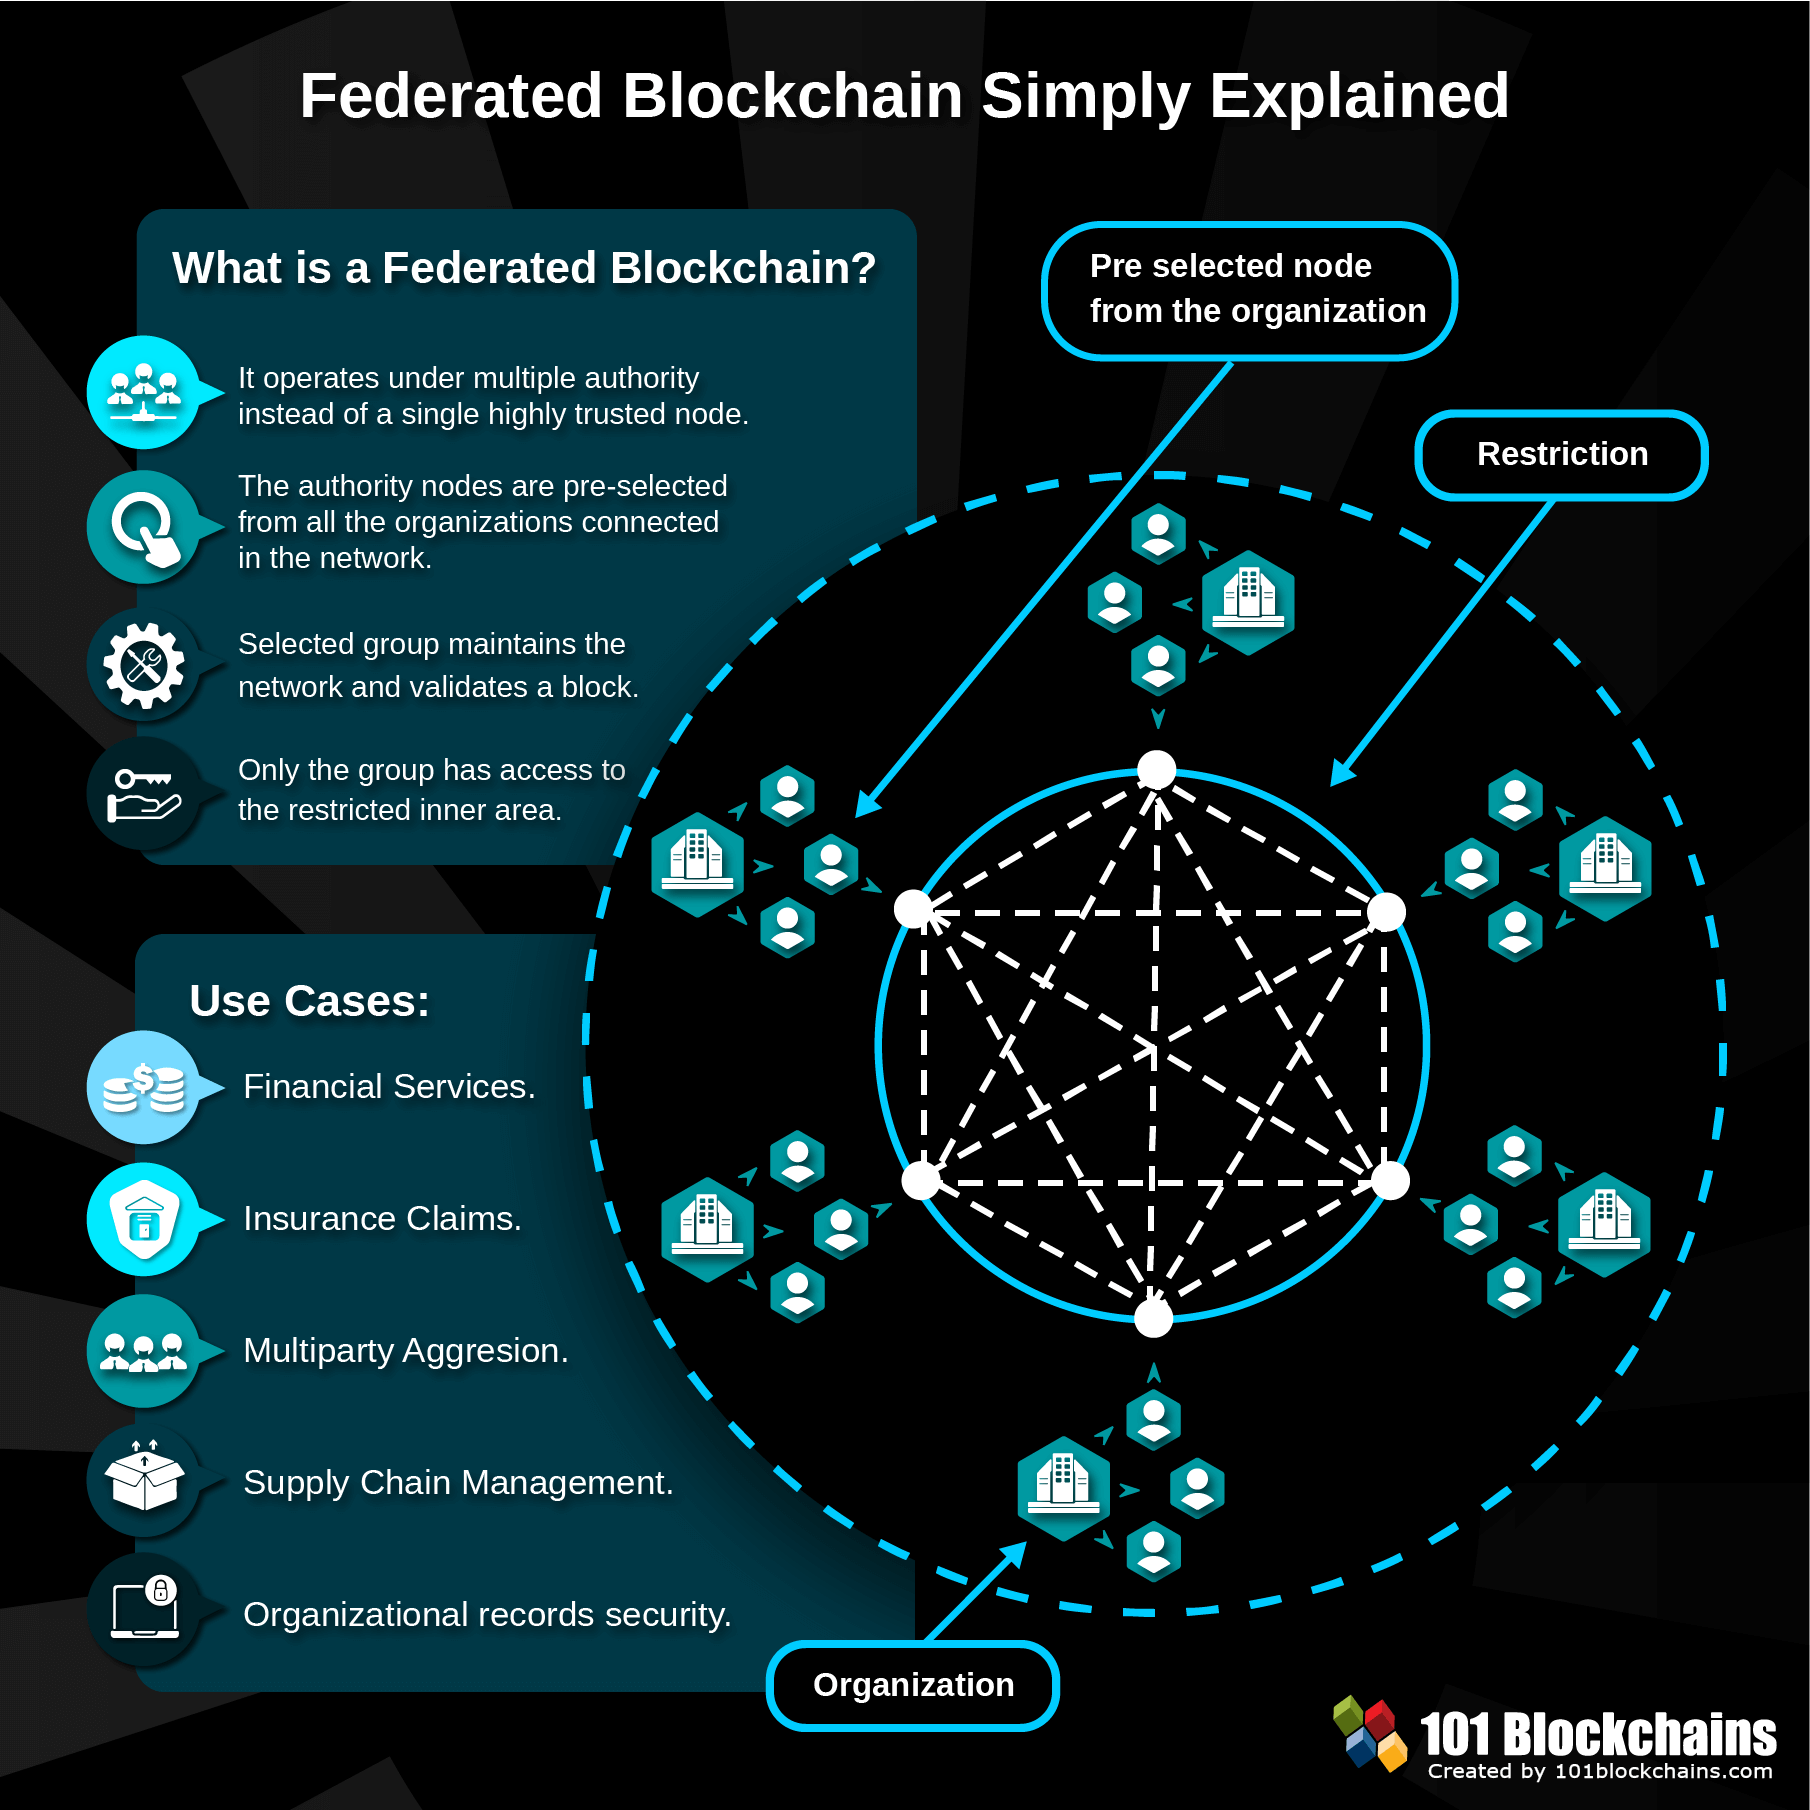 Federated Blockchain Simply Explained